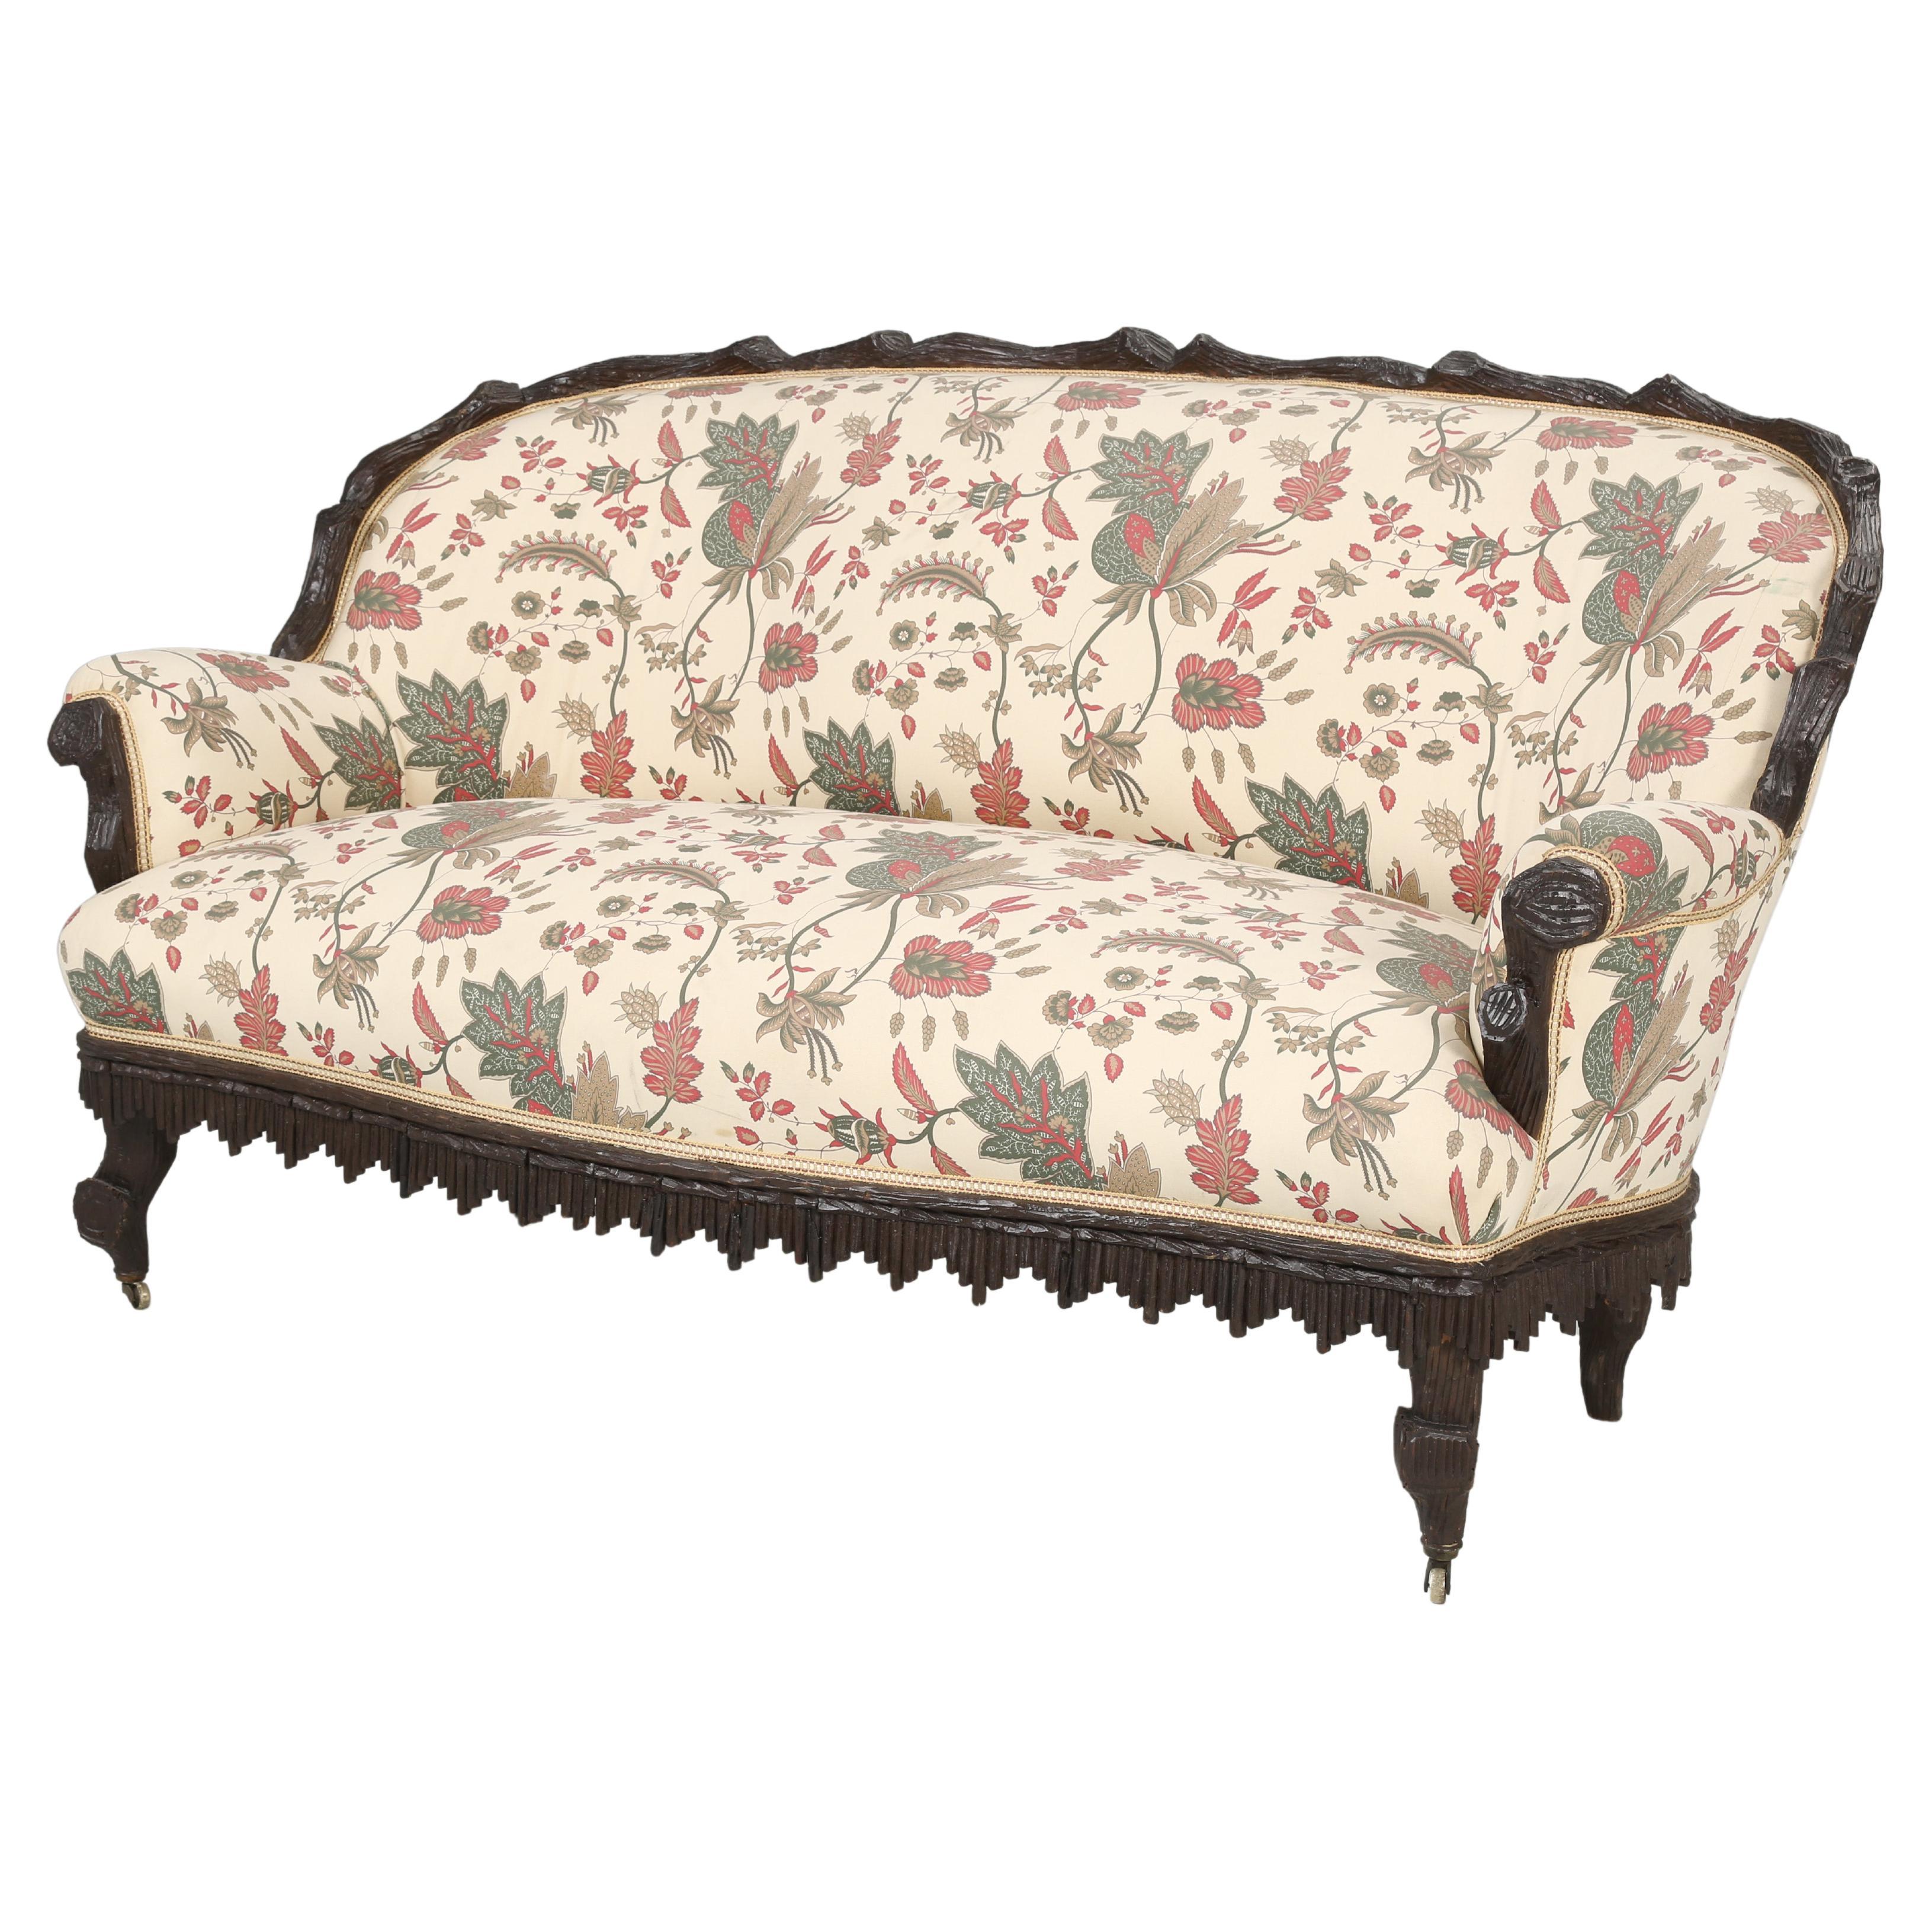 Antique Black Forest Sofa from French Chateau in the South of France, Restored For Sale